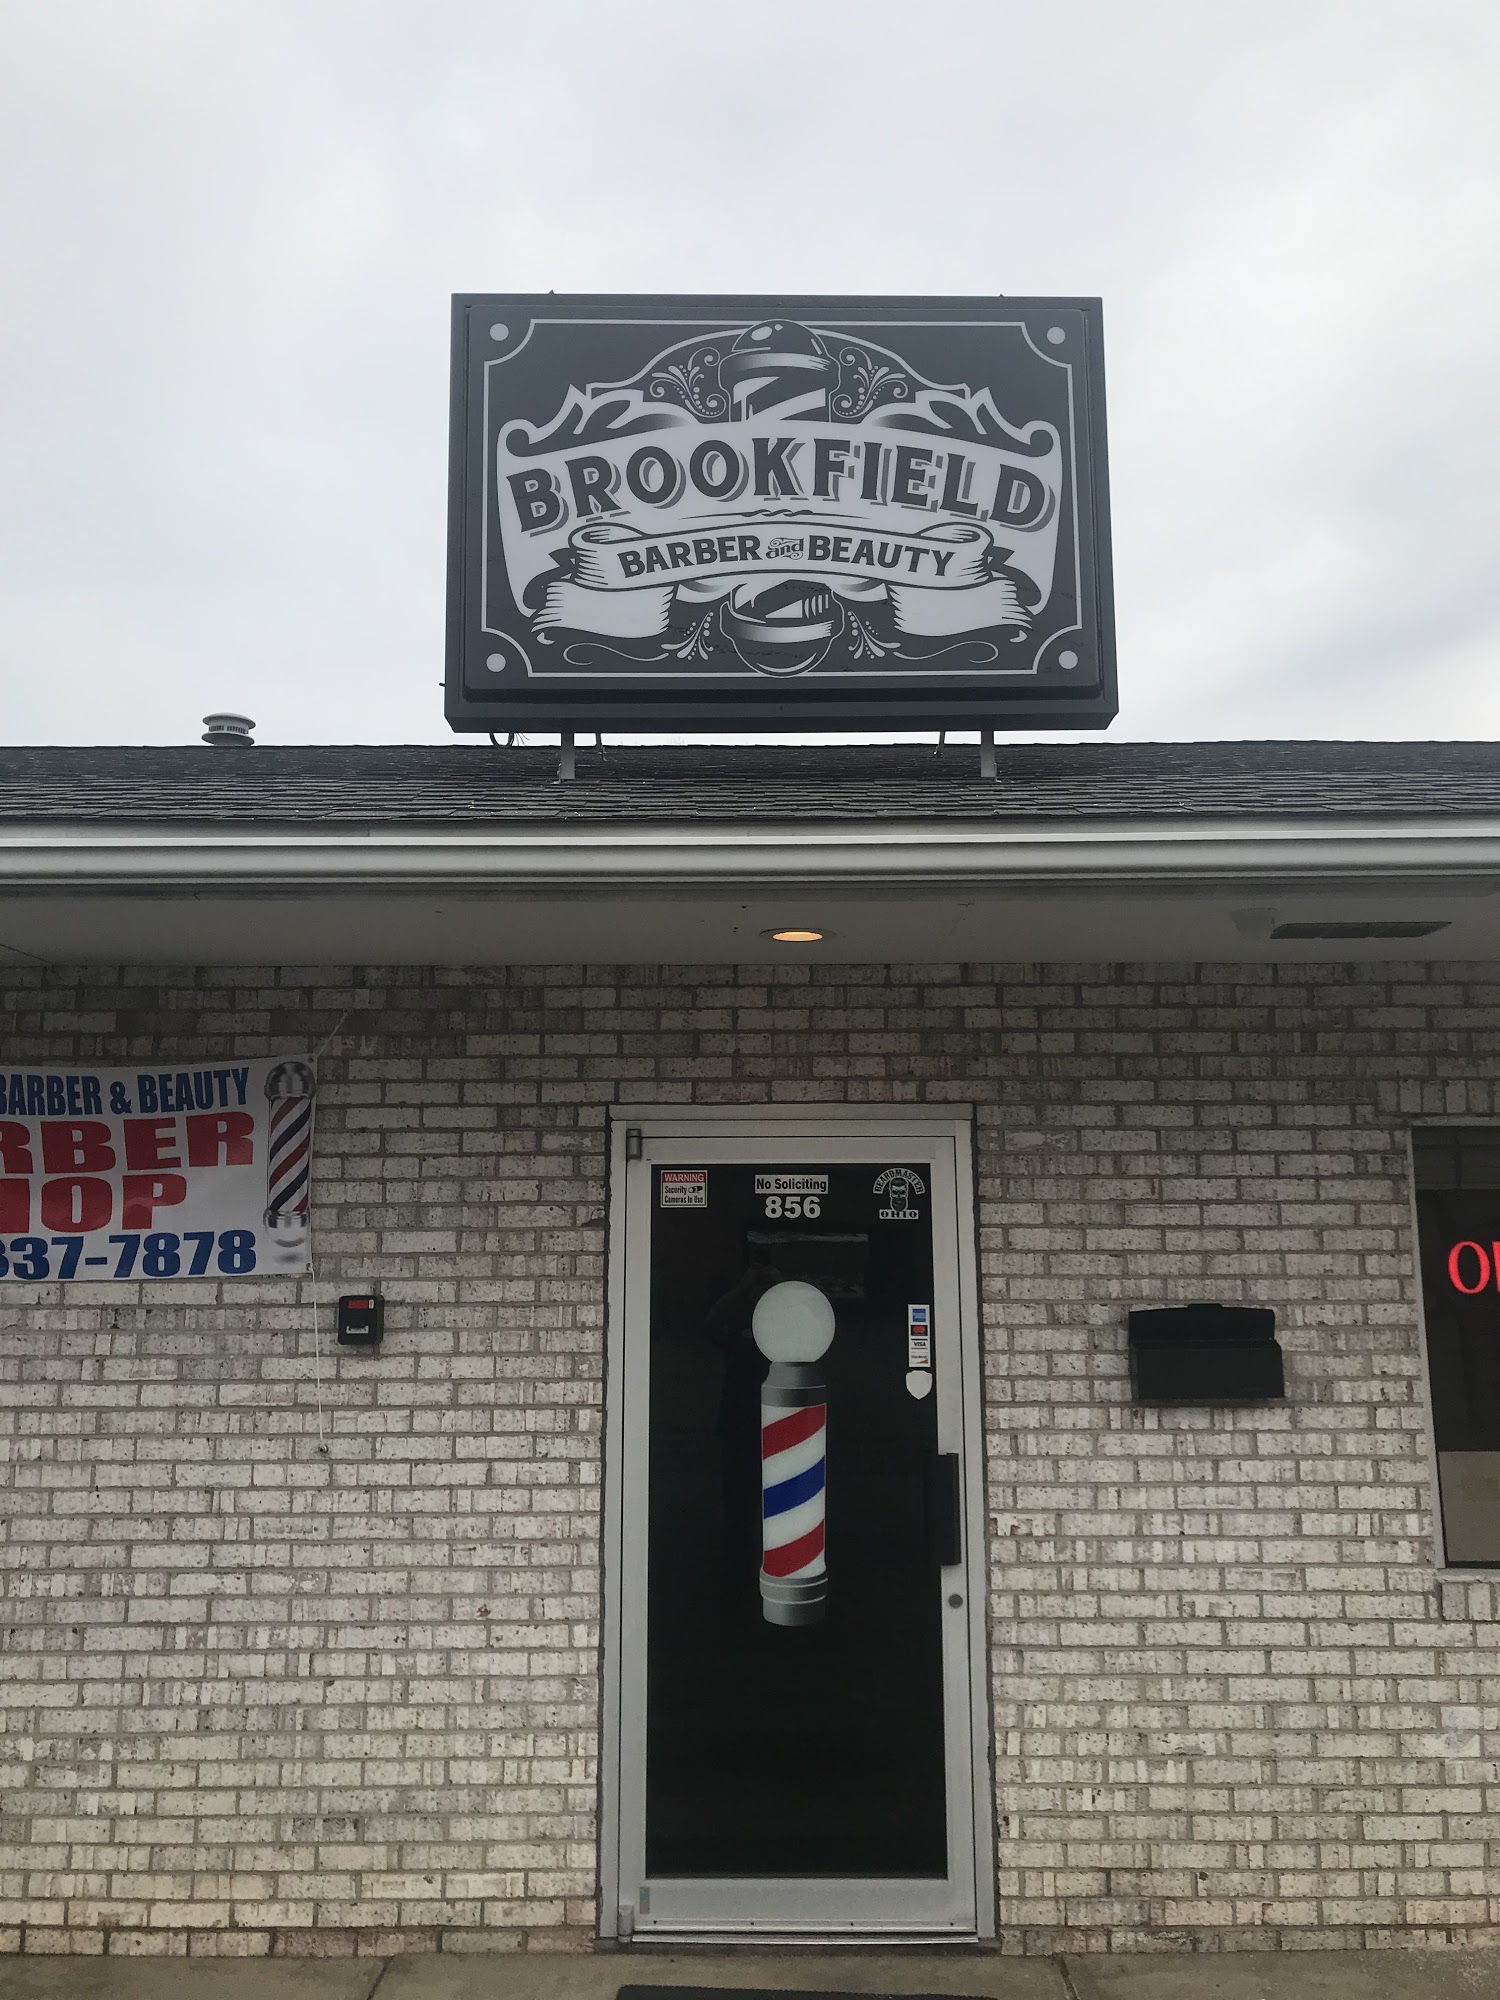 Brookfield Barber and Beauty